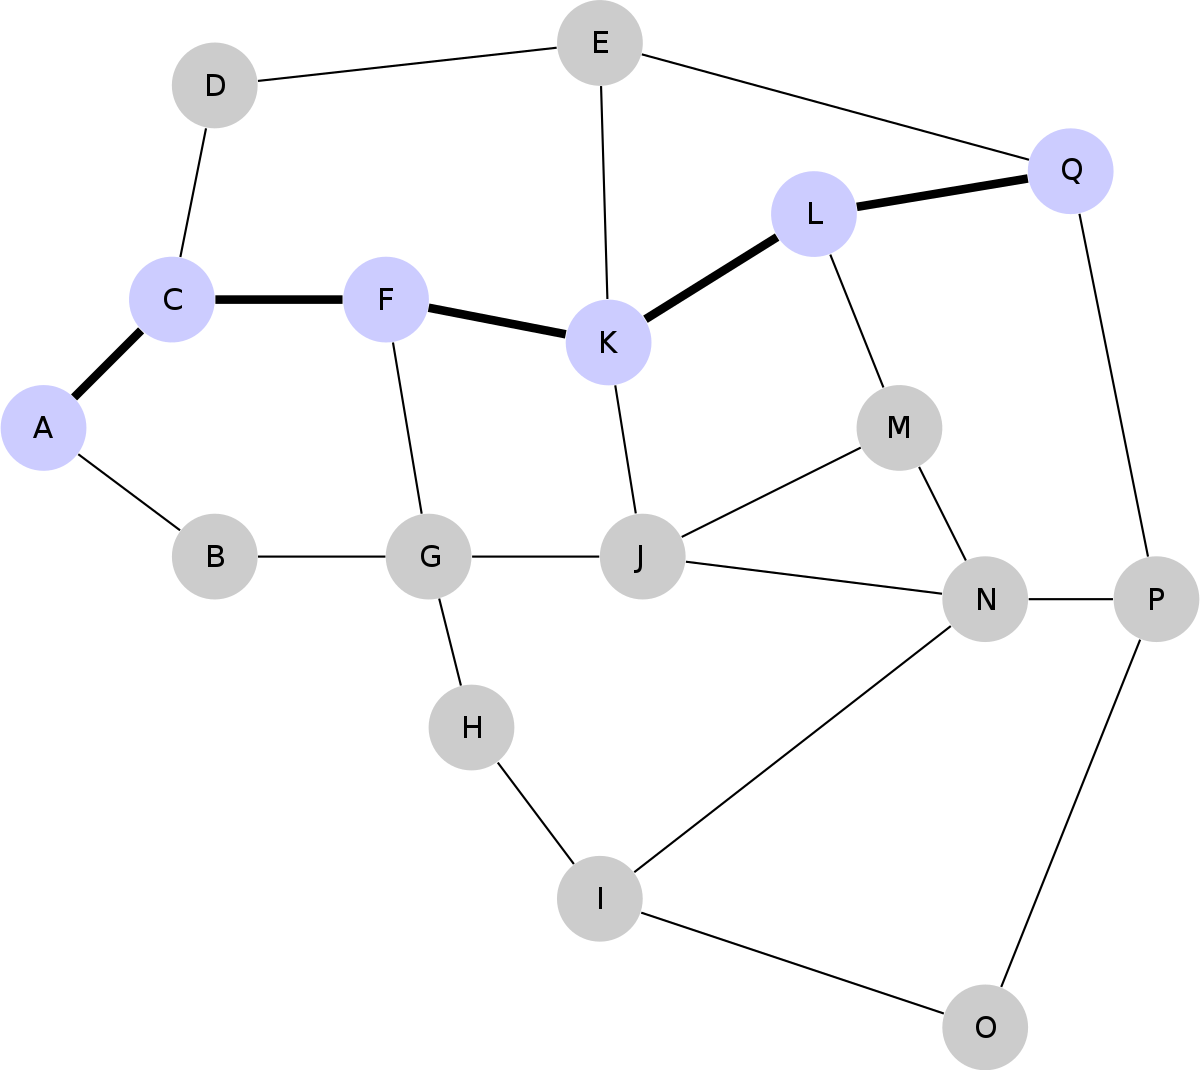 https://upload.wikimedia.org/wikipedia/commons/thumb/7/7a/17_node_mesh_network.svg/1200px-17_node_mesh_network.svg.png